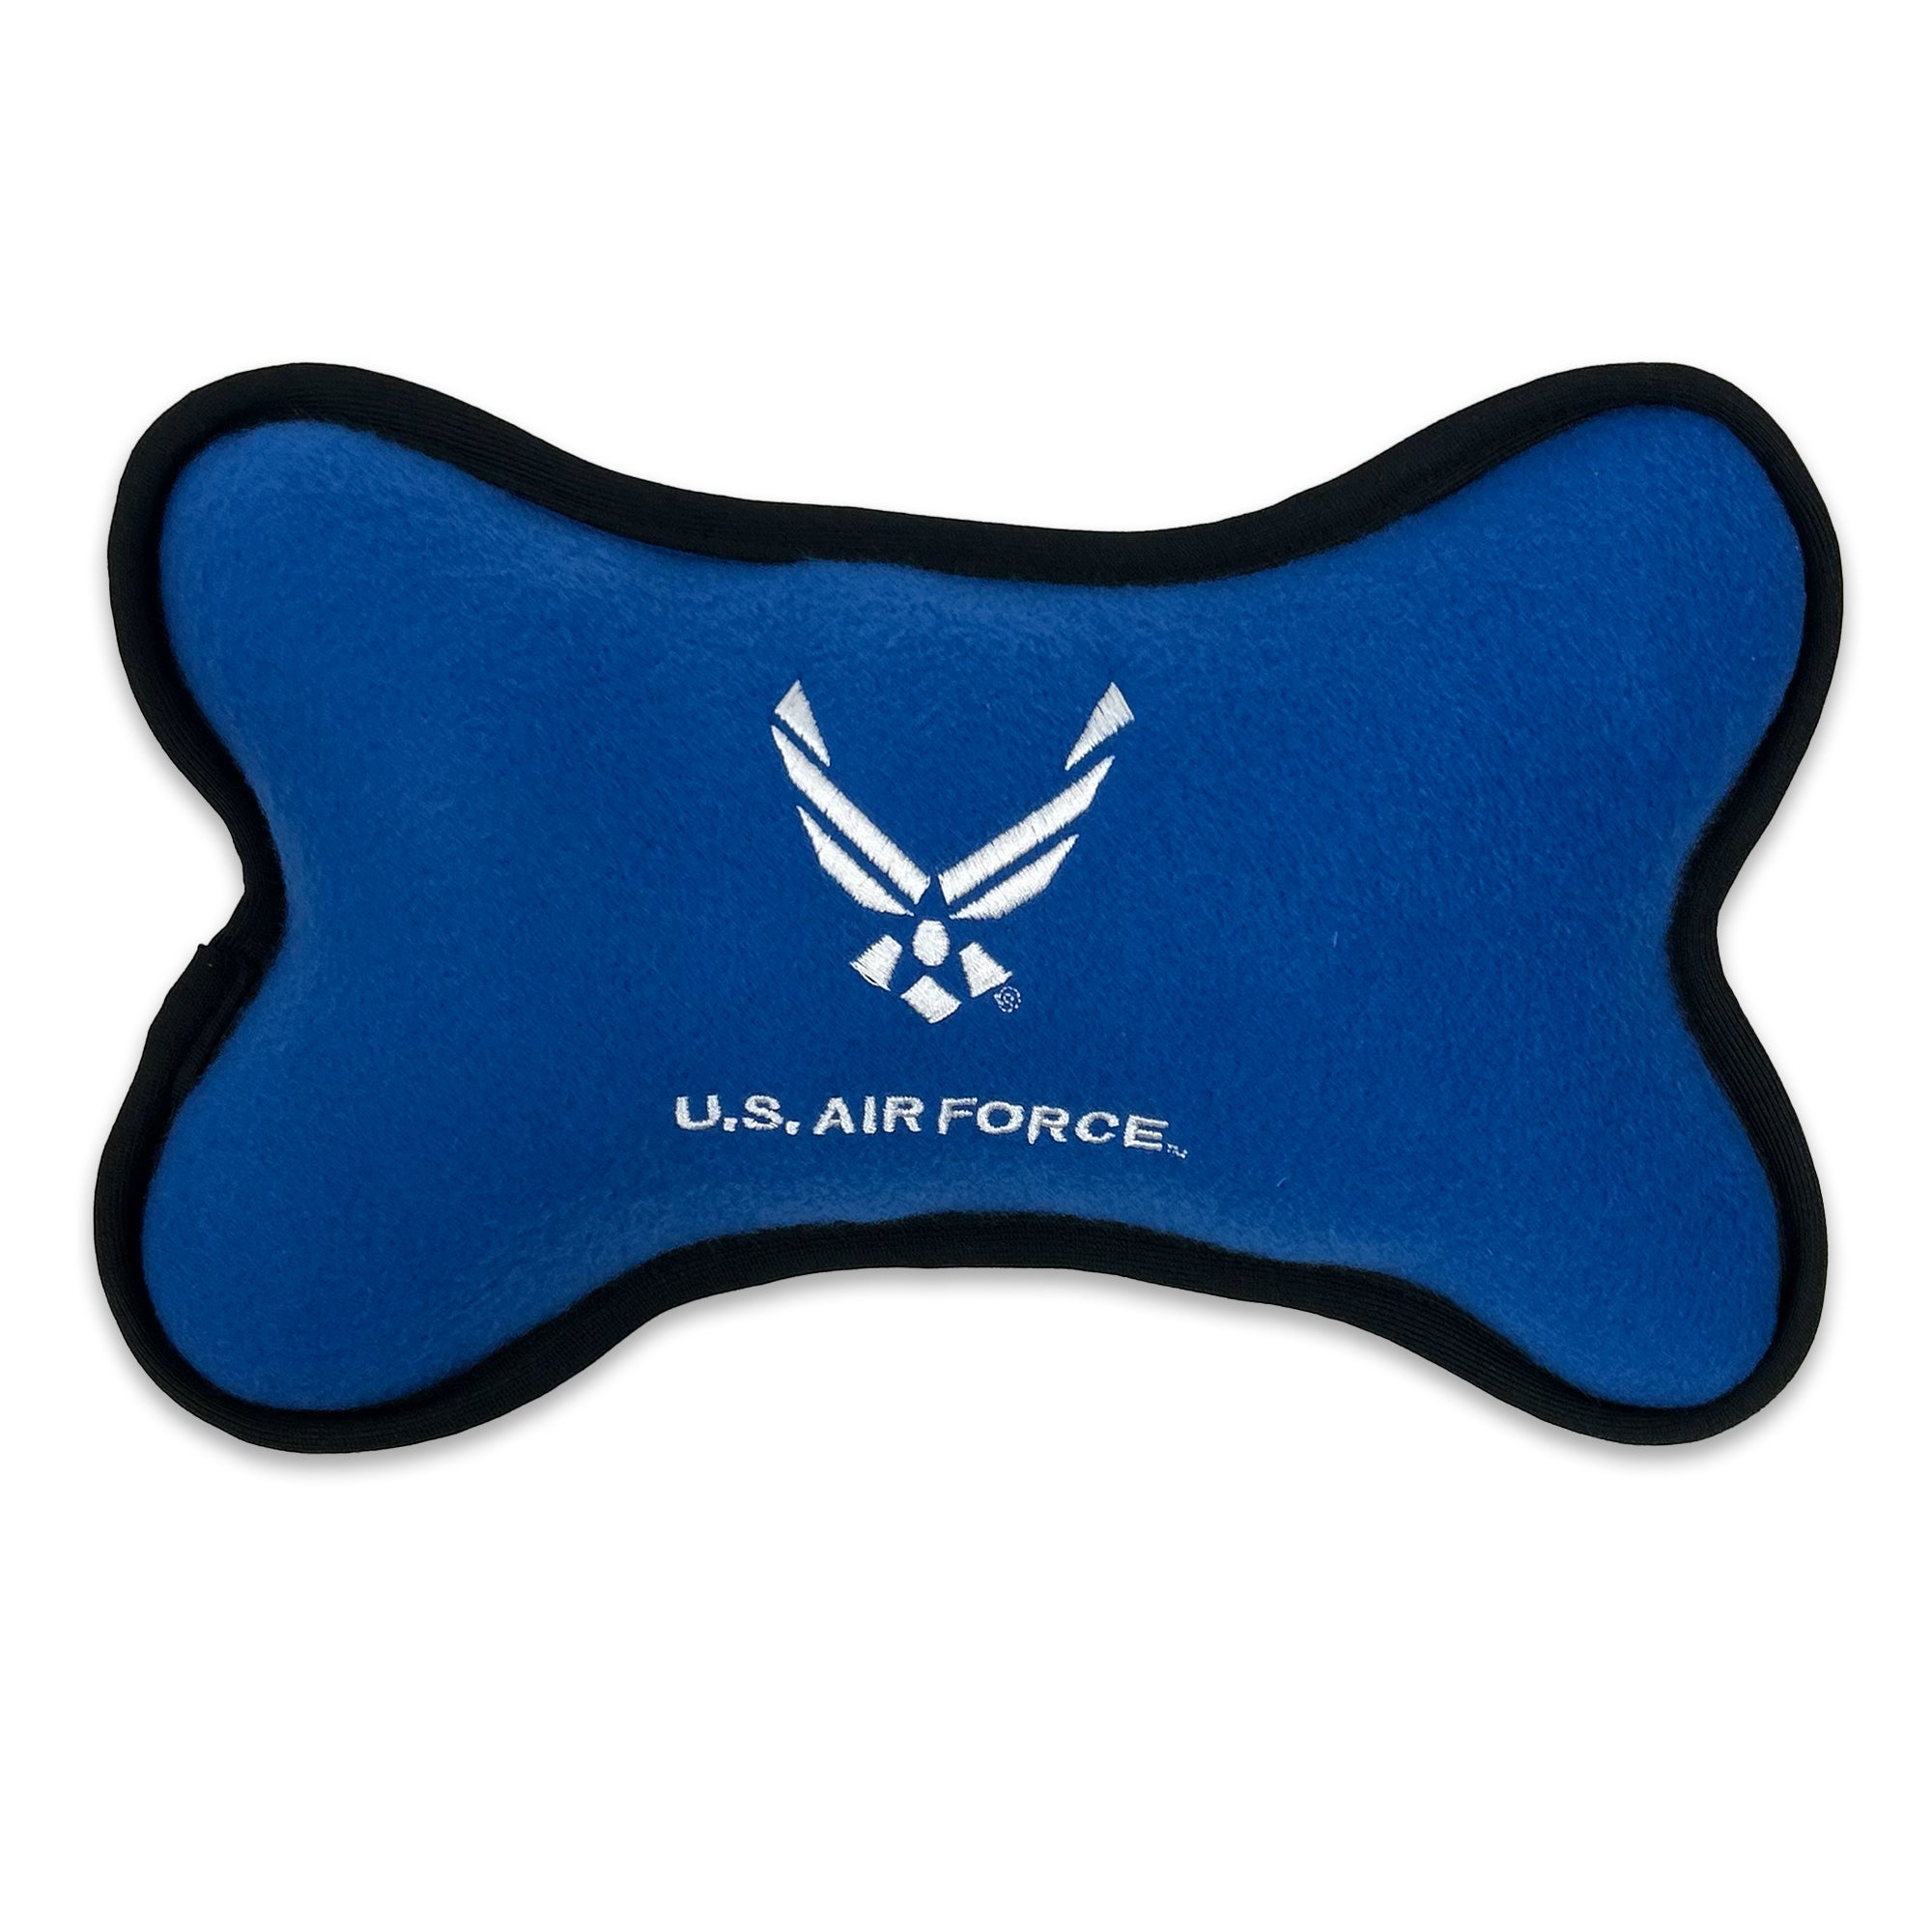 U.S. Air Force Embroidered Bone Shaped Squeak Toy (Large - 10")